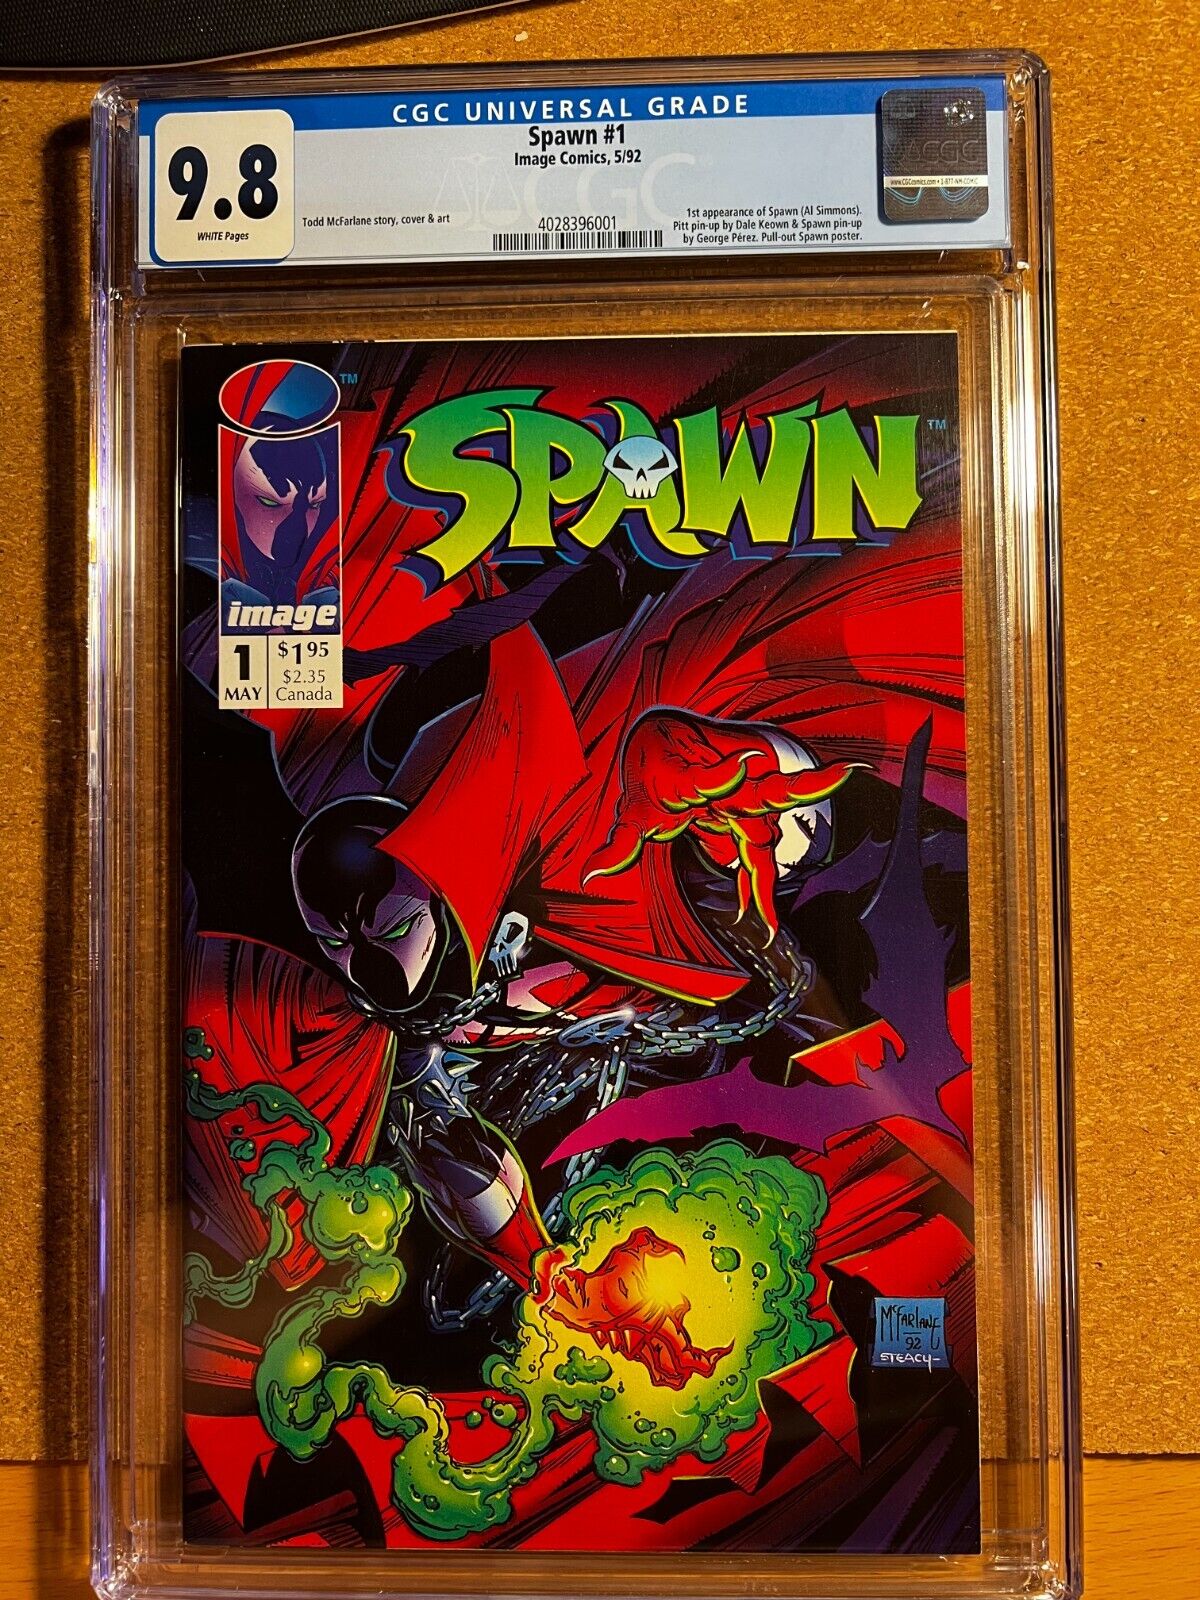 Spawn #1 CGC 9.8 NM/M White Pages Key Issue Image 1992 1st Al Simmons Sam Twitch